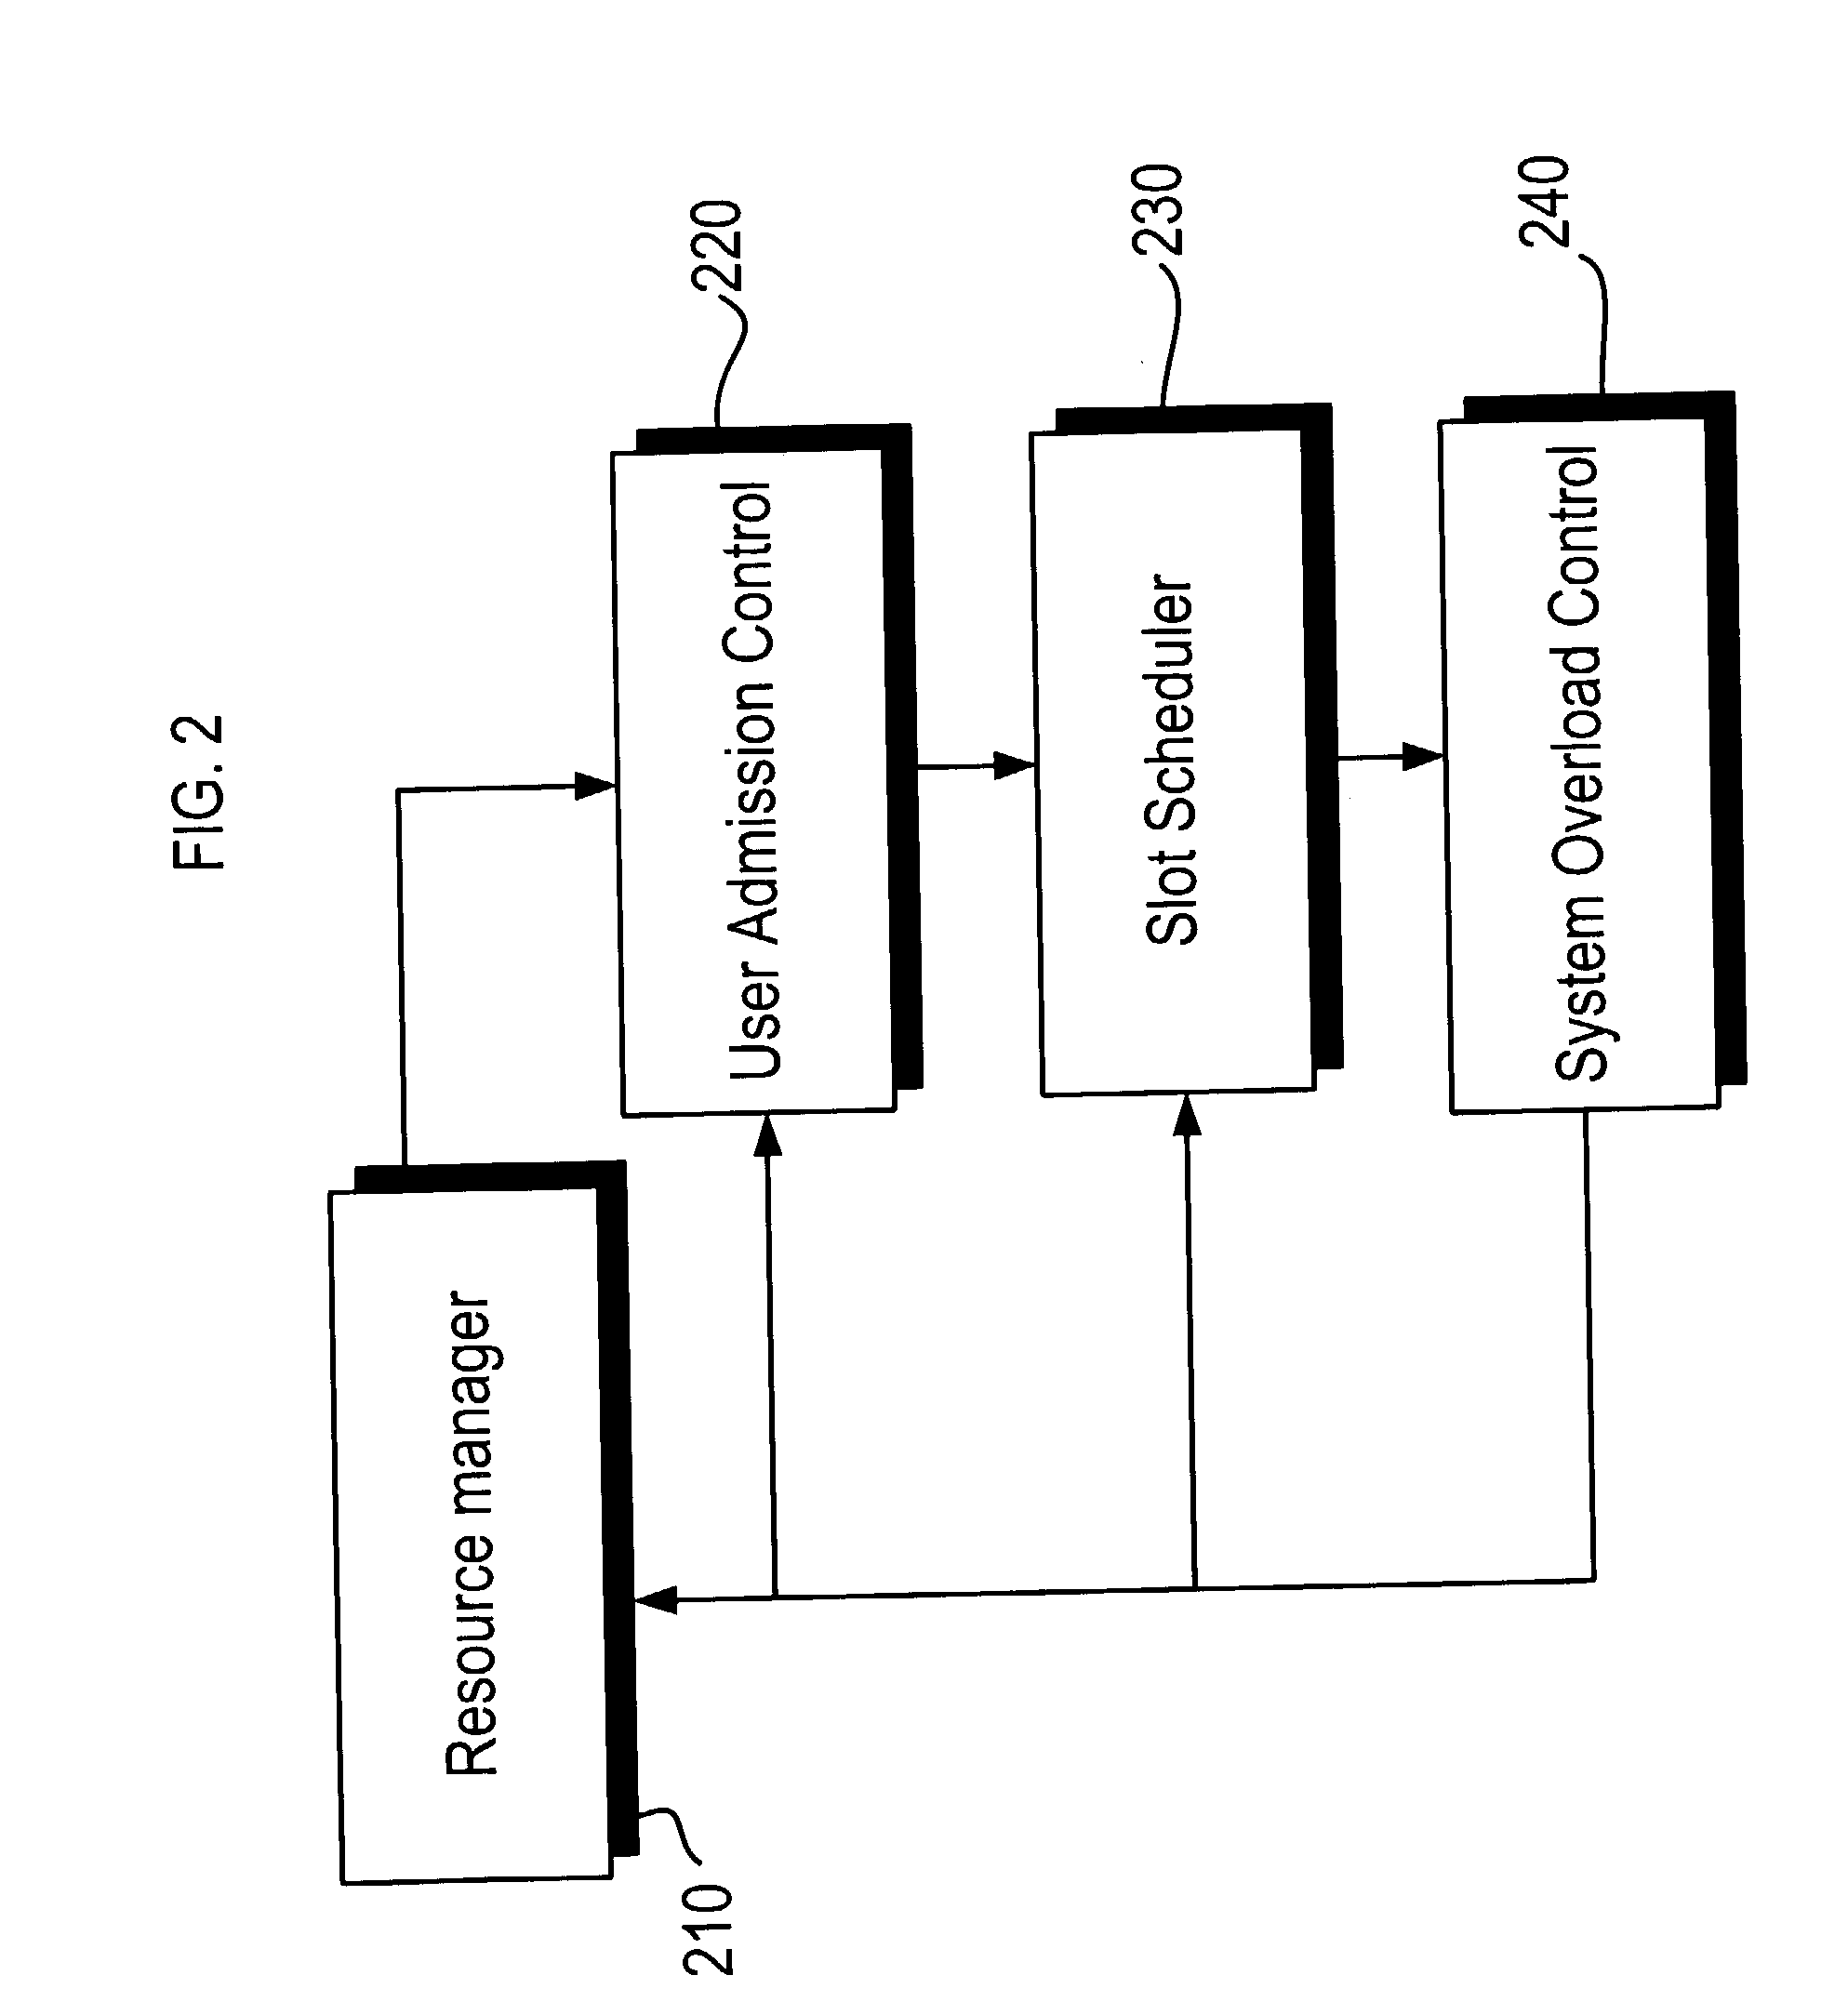 Scheduler and method for scheduling transmissions in a communication network